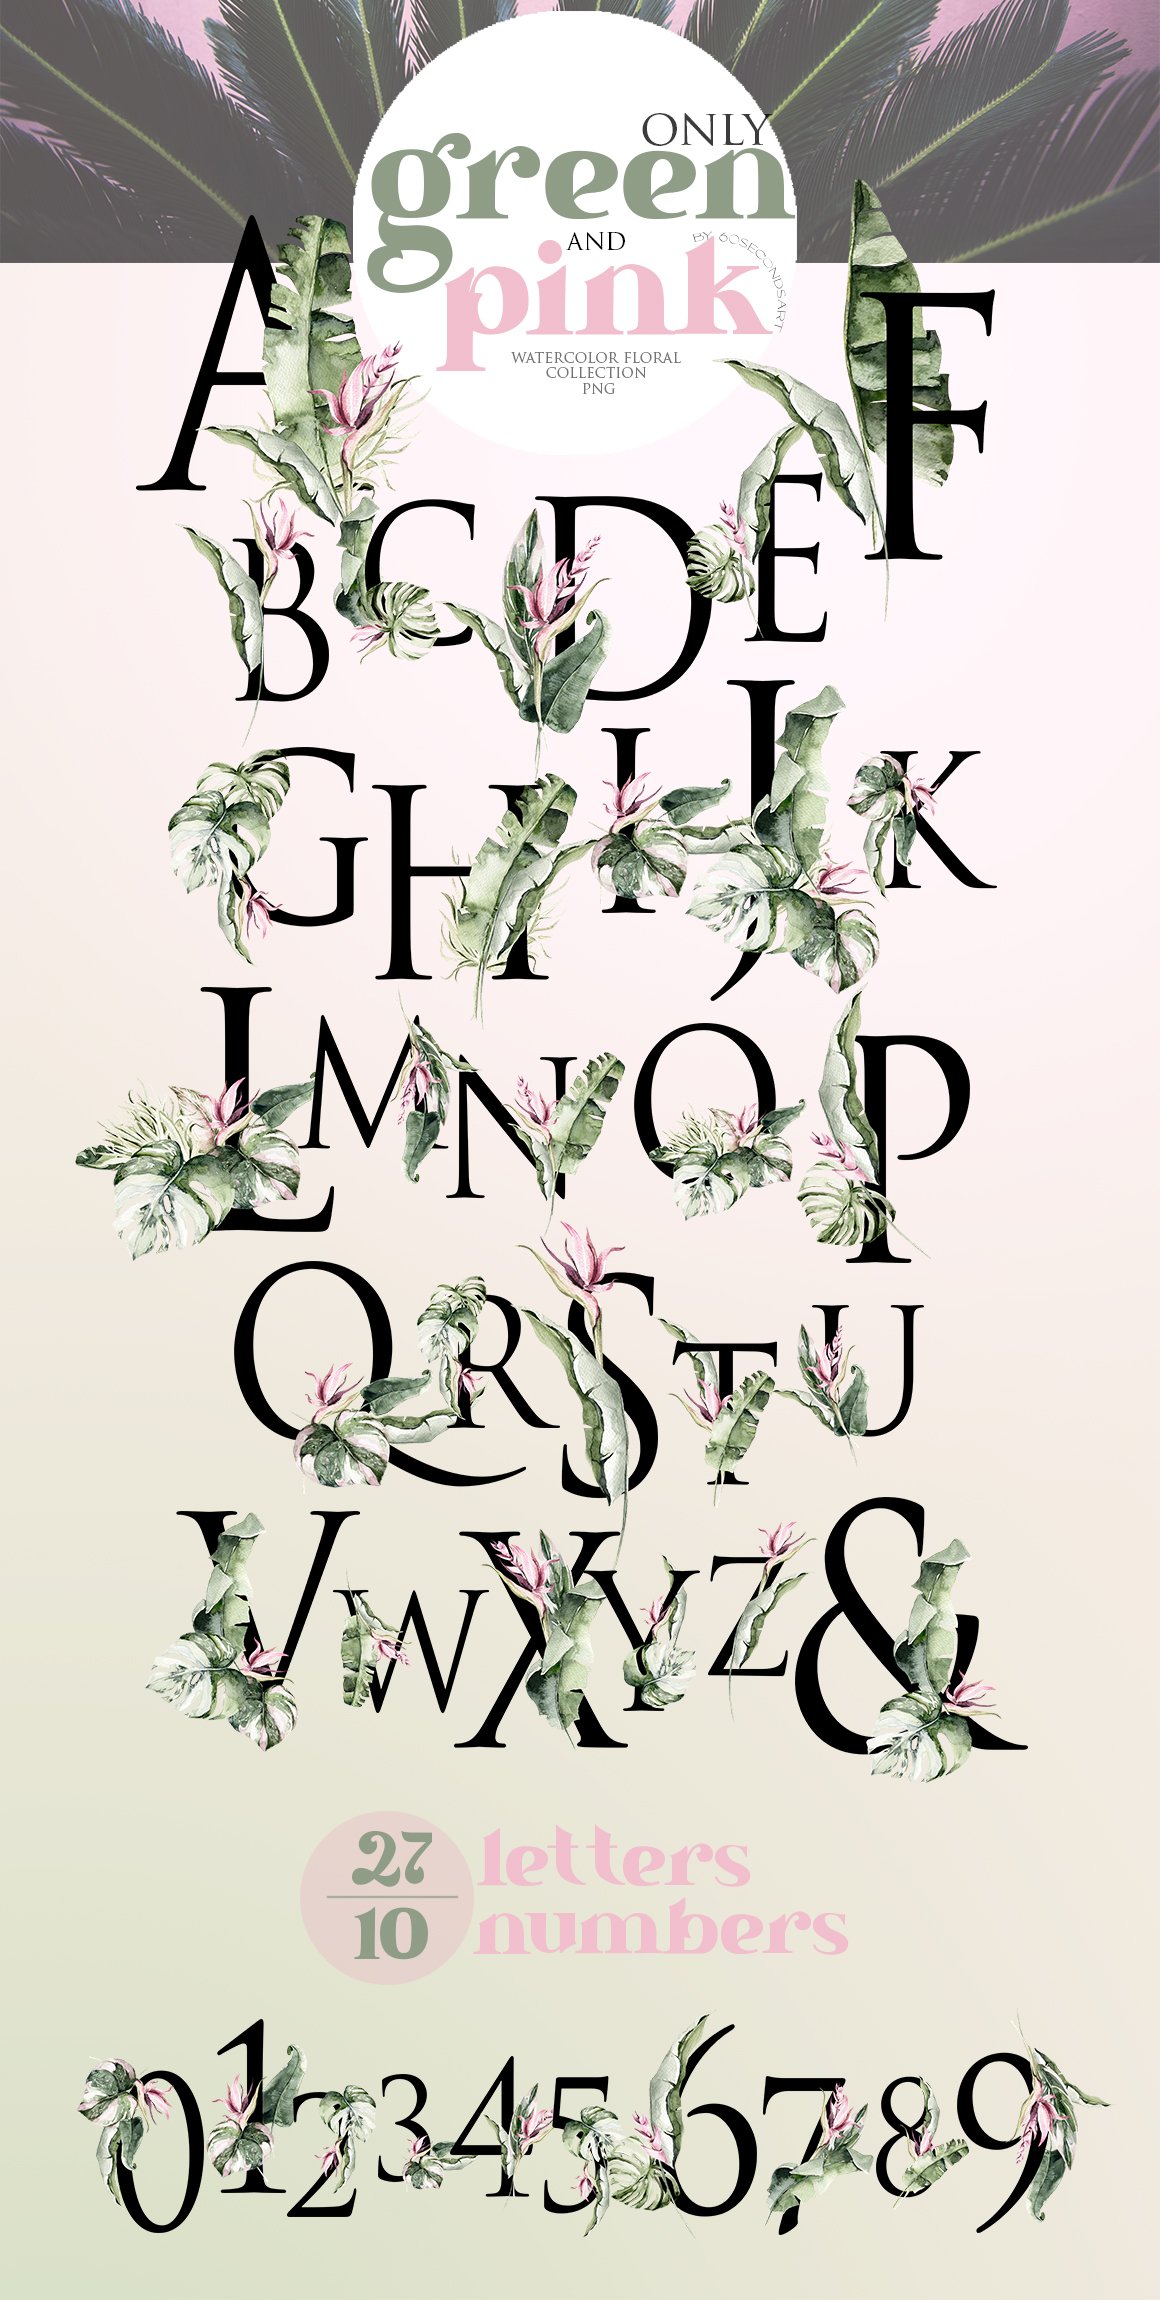 Poster with a bunch of letters and numbers by Annabel Kidston.